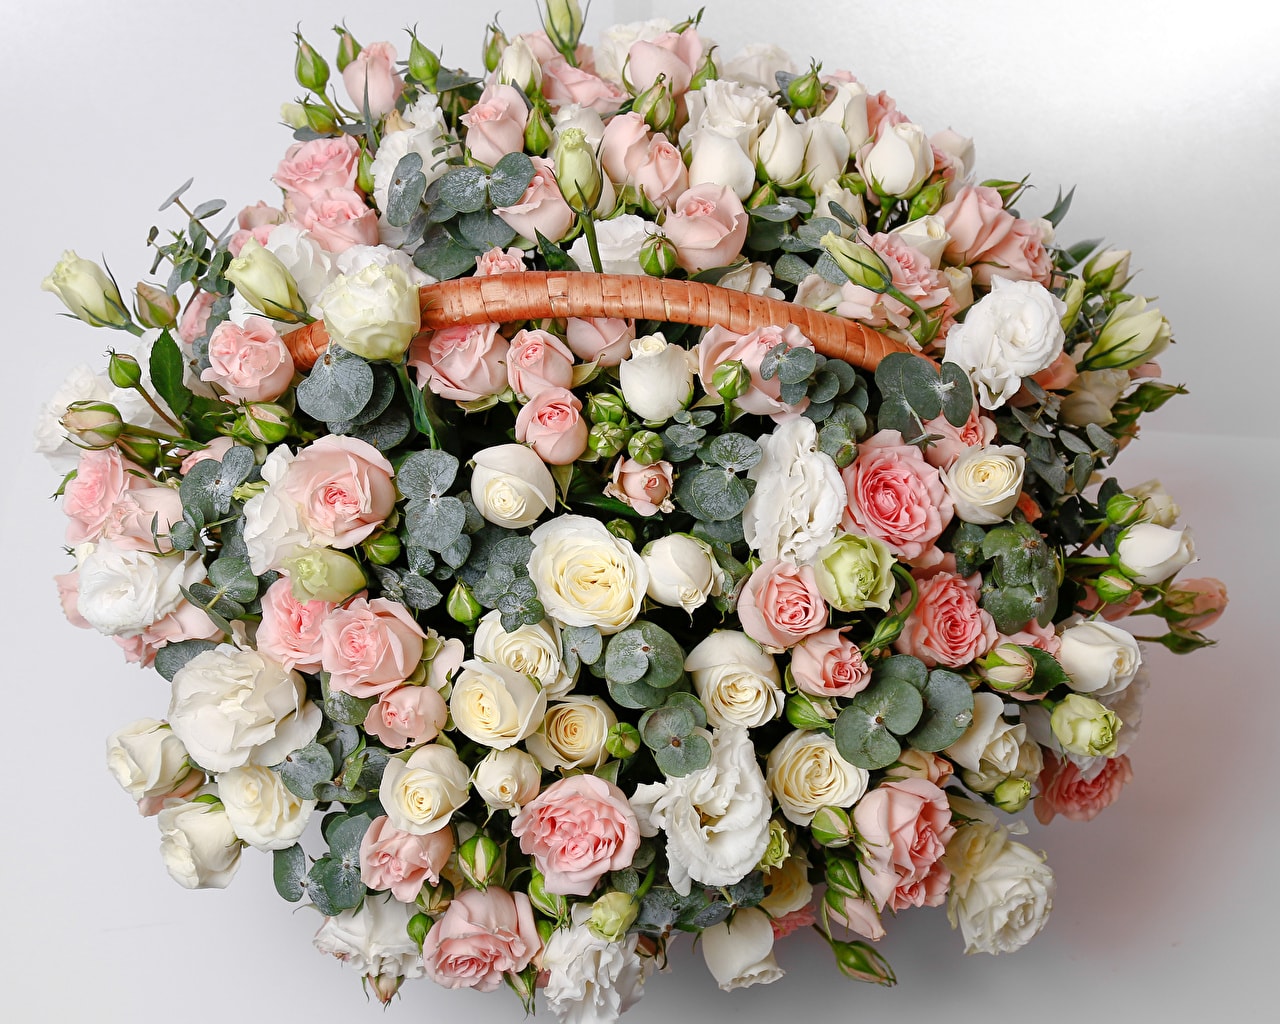 Mazzo Di Fiori Bellissimi.Pictures Of Beautiful Bouquets Of Flowers 80 Pieces Of Stunning